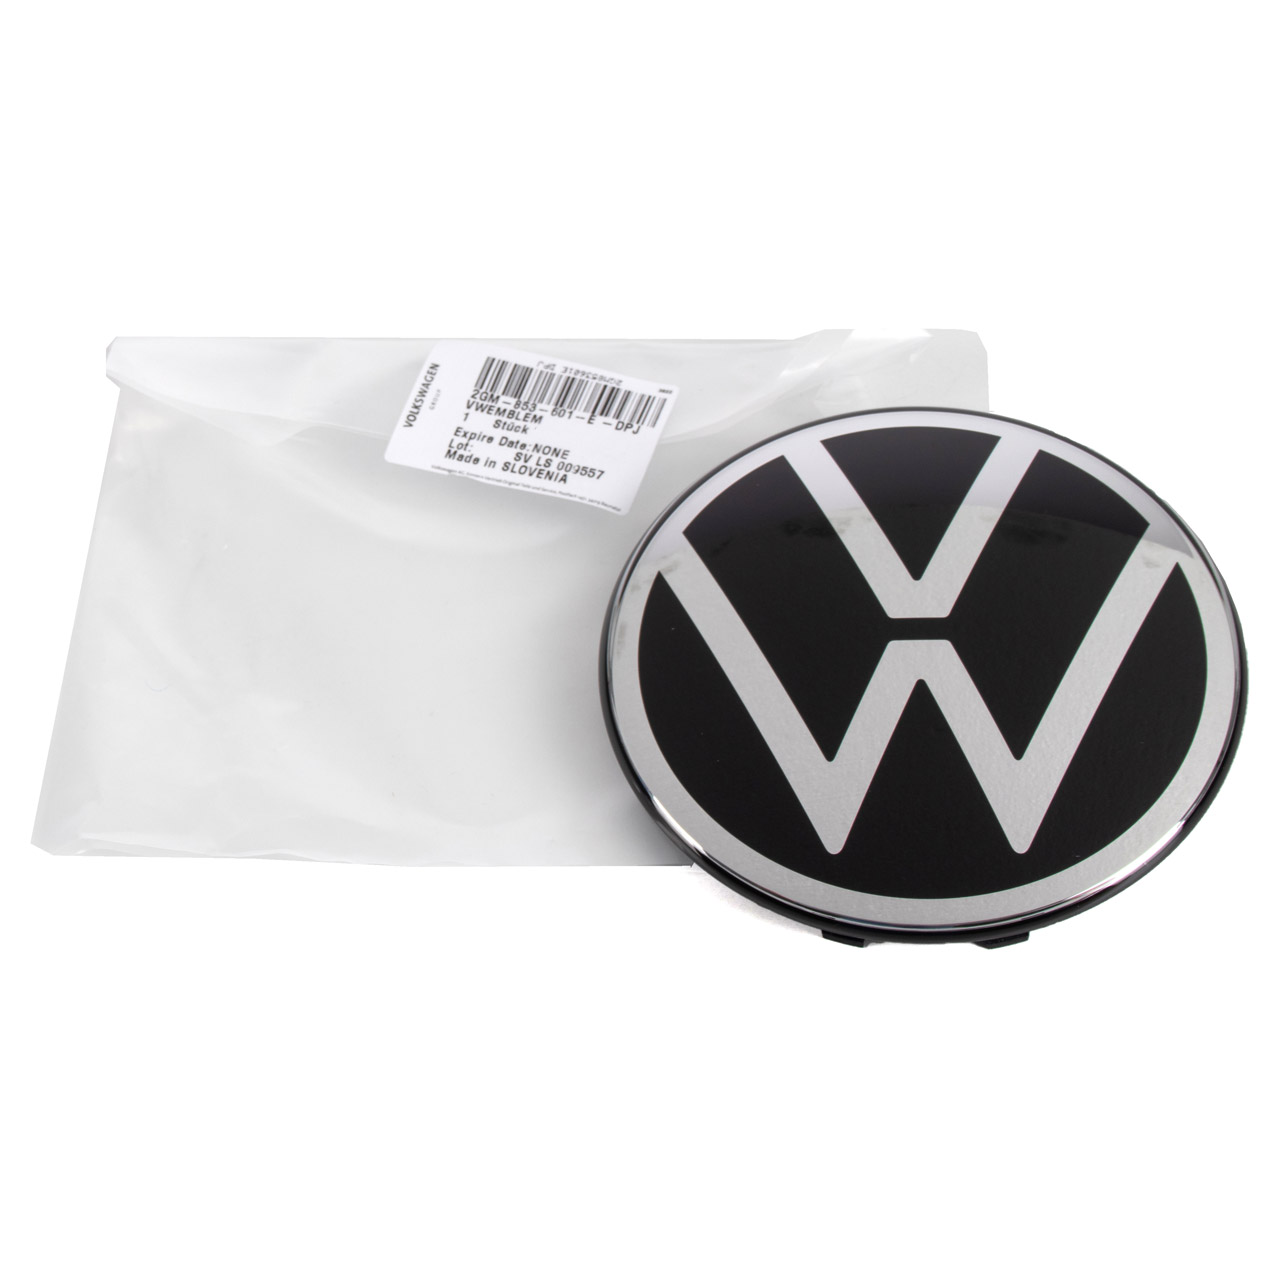 NEW GENUINE VOLKSWAGEN T-CROSS C11 R-LINE LOGO BADGE ON FRONT GRILL  2GM853948LDB in Badges & Emblems - buy best tuning parts in   store